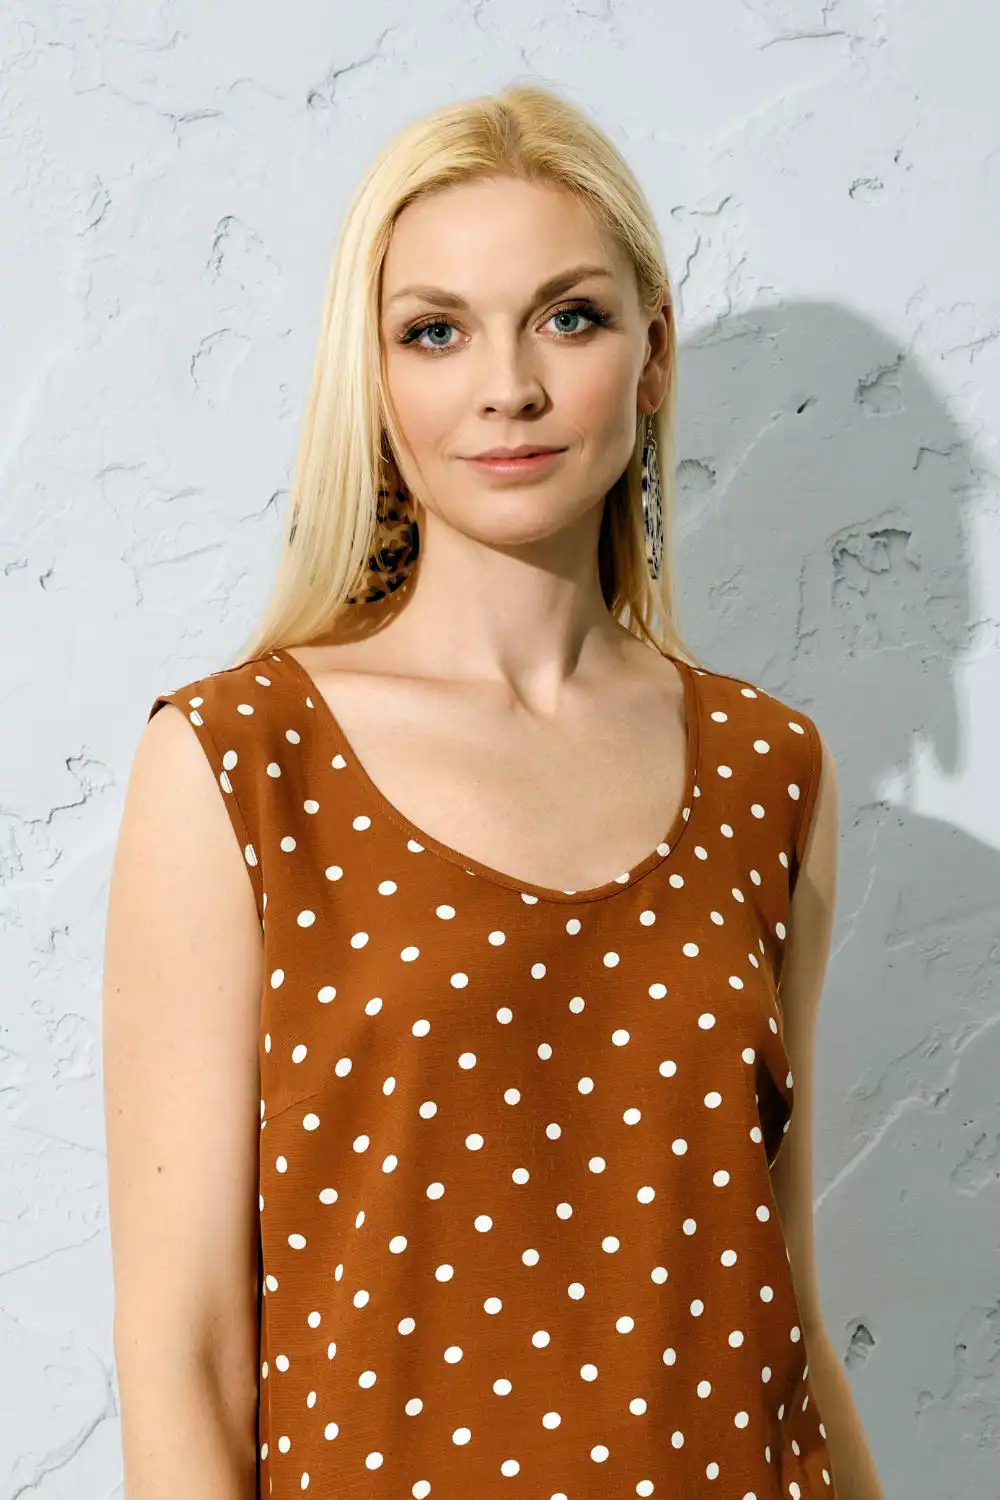 Fashionable blonde woman standing indoors in sleeveless blouse